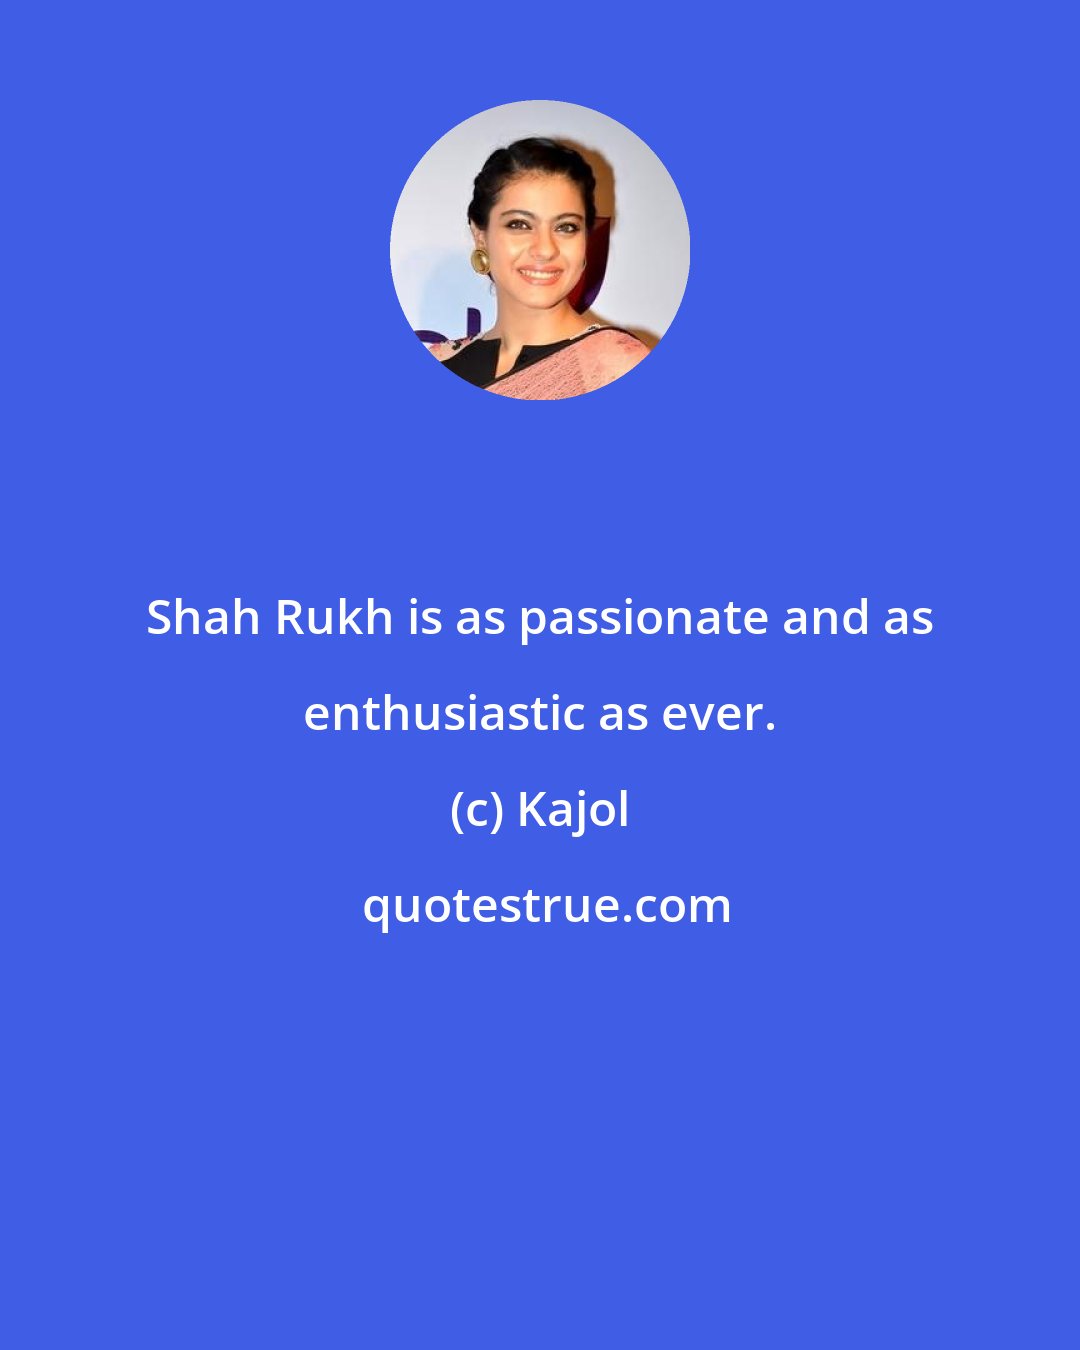 Kajol: Shah Rukh is as passionate and as enthusiastic as ever.